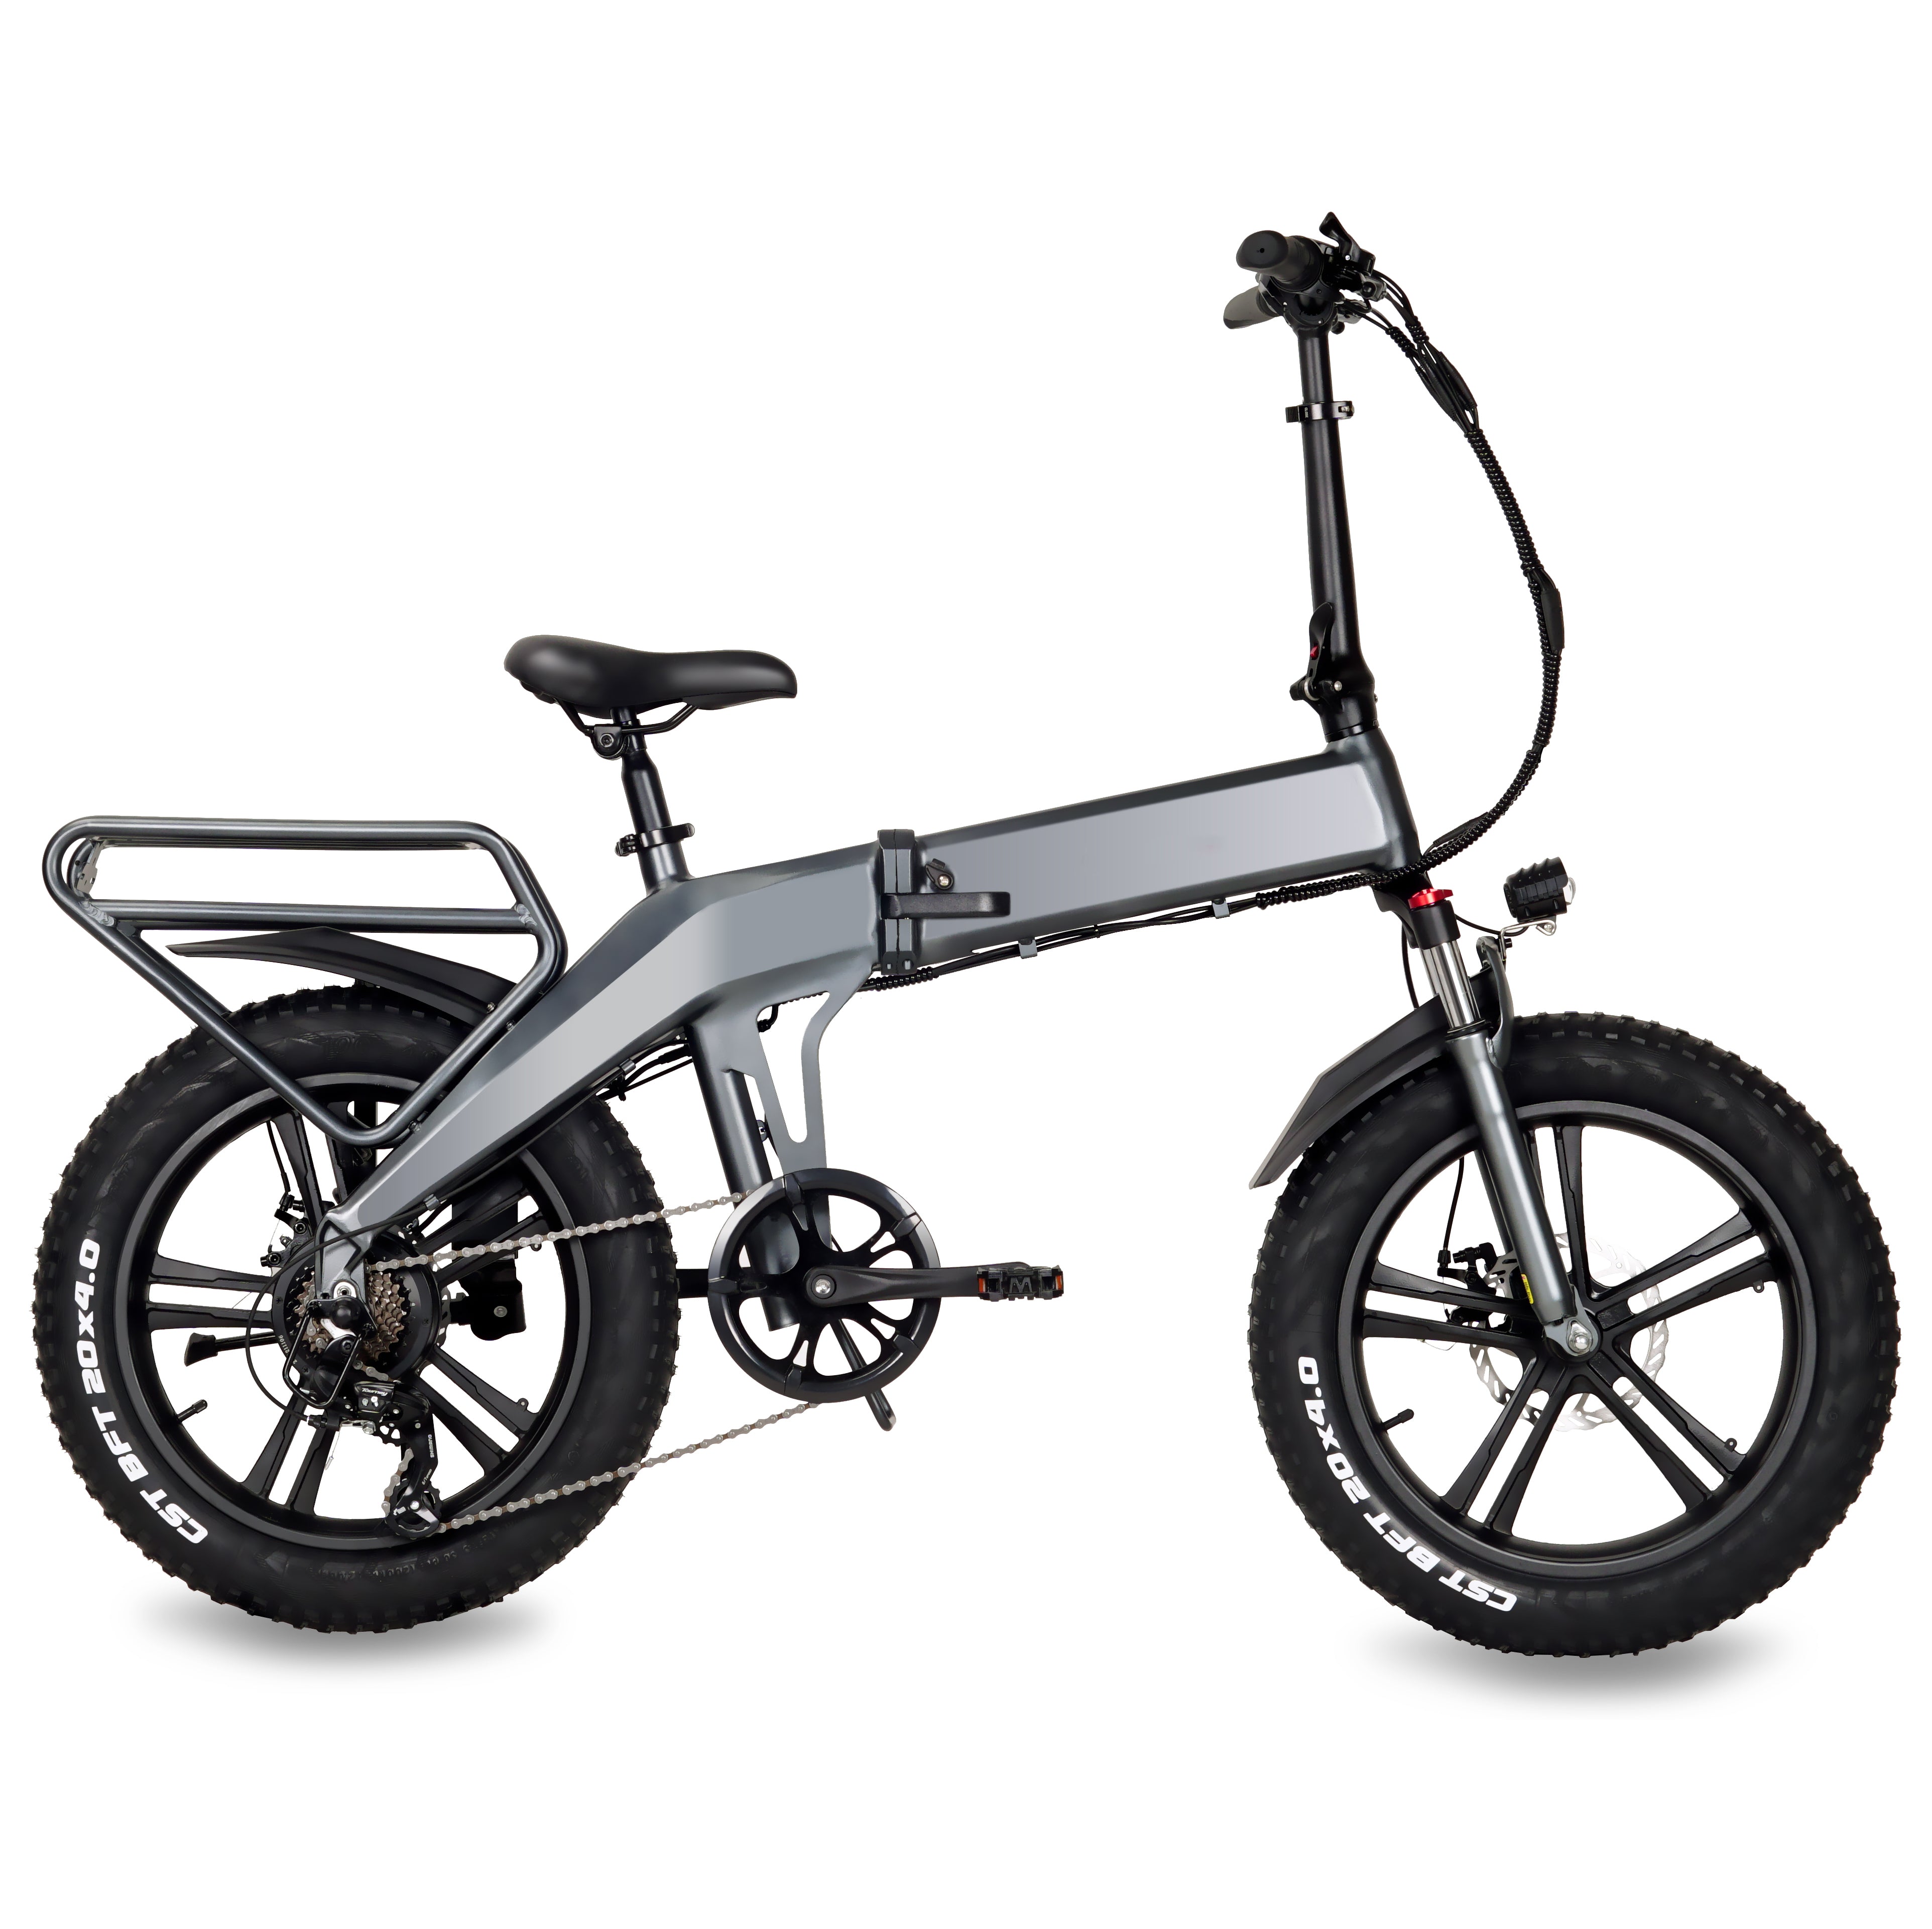 CYBERBOT X1 Electric Bicycle